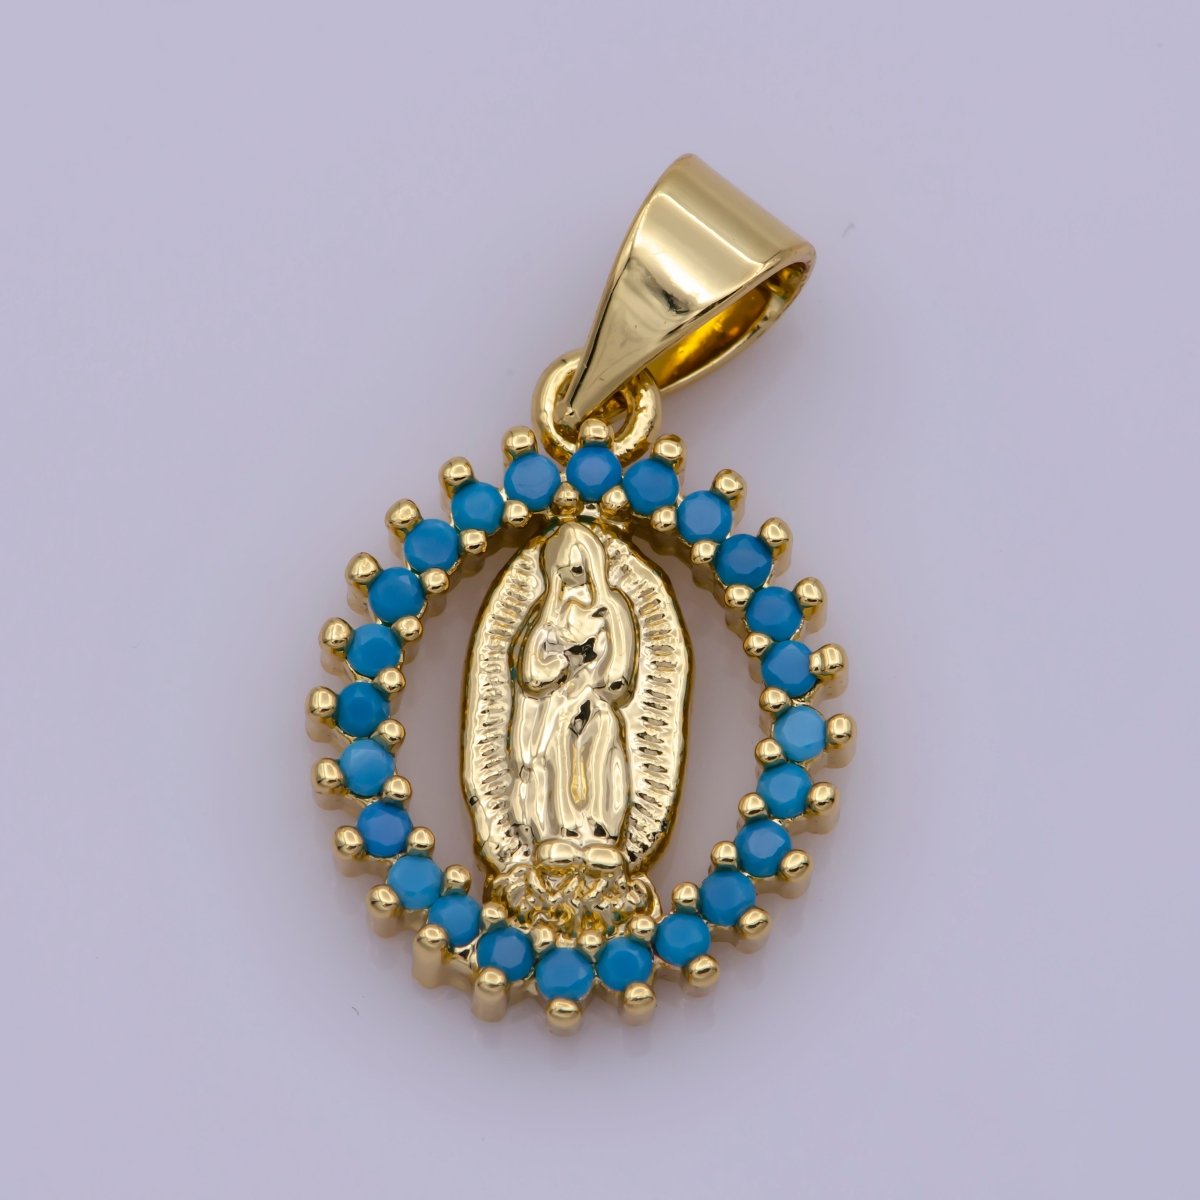 14k Gold Filled Virgin Mary Pendant Necklace Pink Micro Pave Virgen de Guadalupe Medallion Pendant for Necklace Religious Jewelry Supply I-002 I-901~I-904 N-1406 - DLUXCA